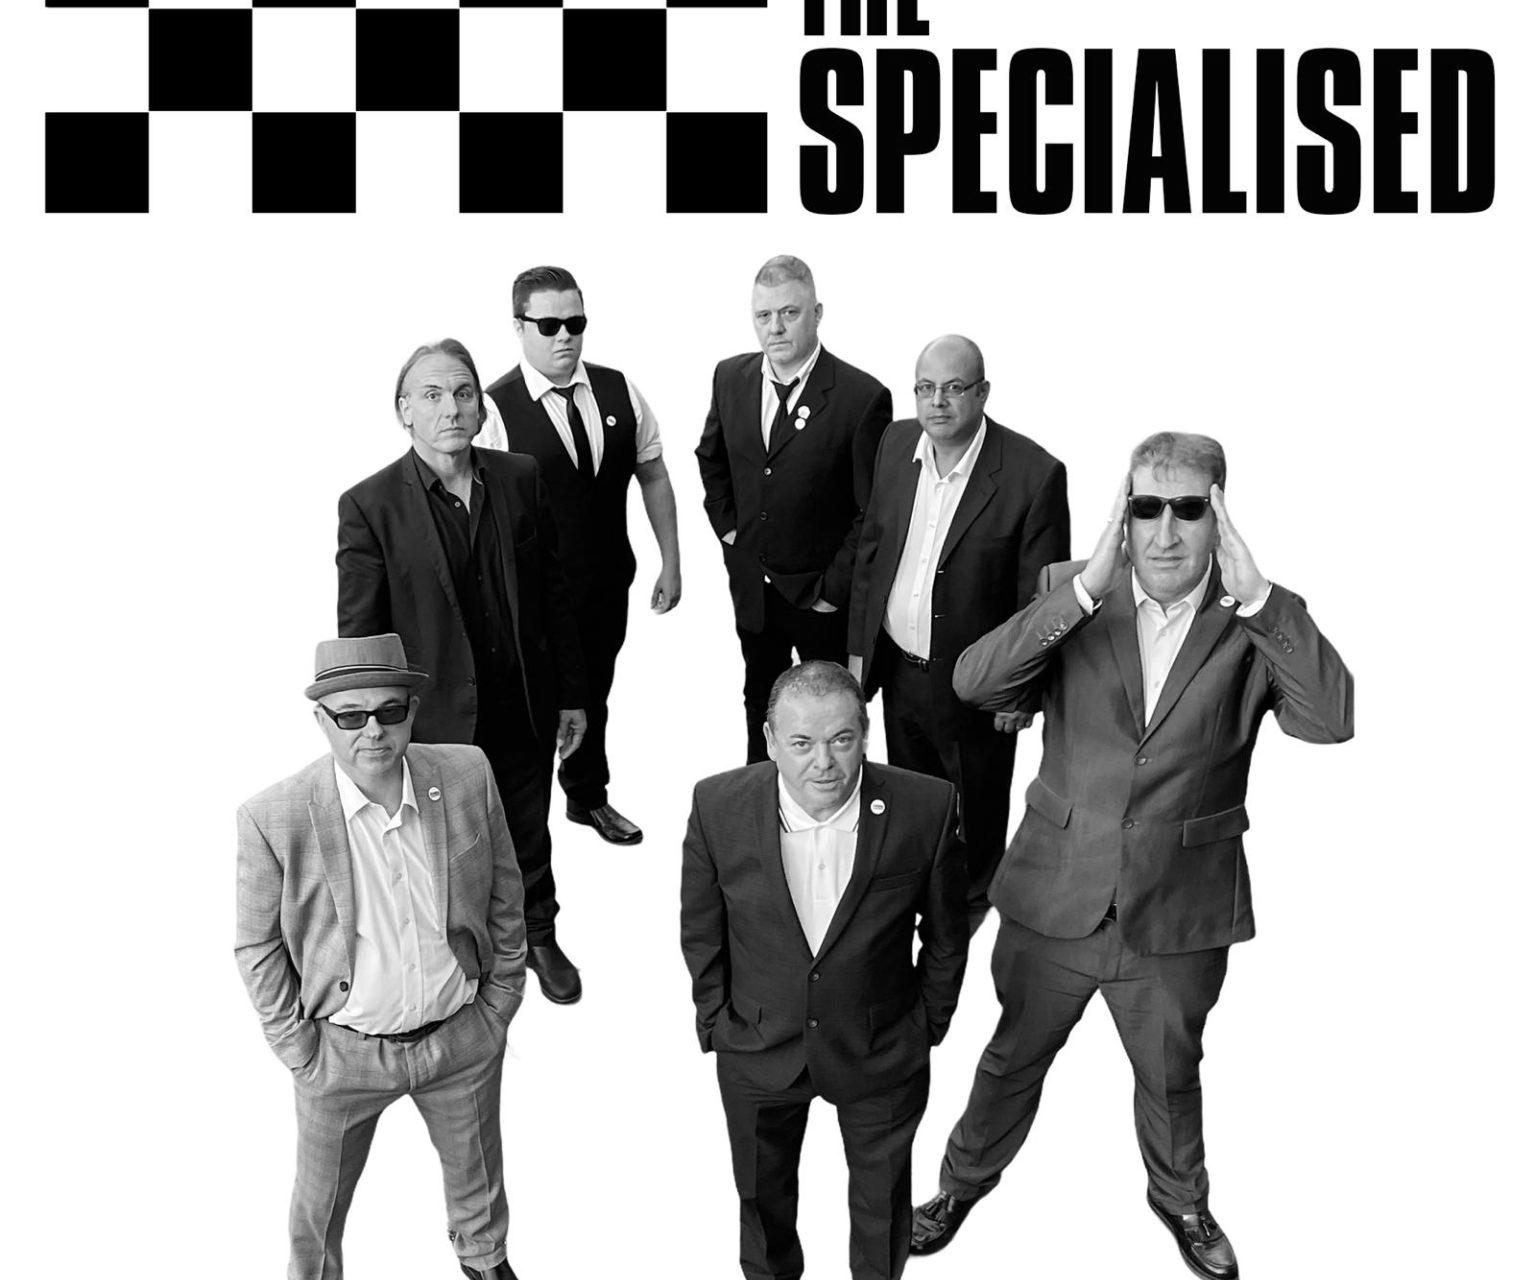 The Specialised (Tribute to The Specials) + Kings Rd